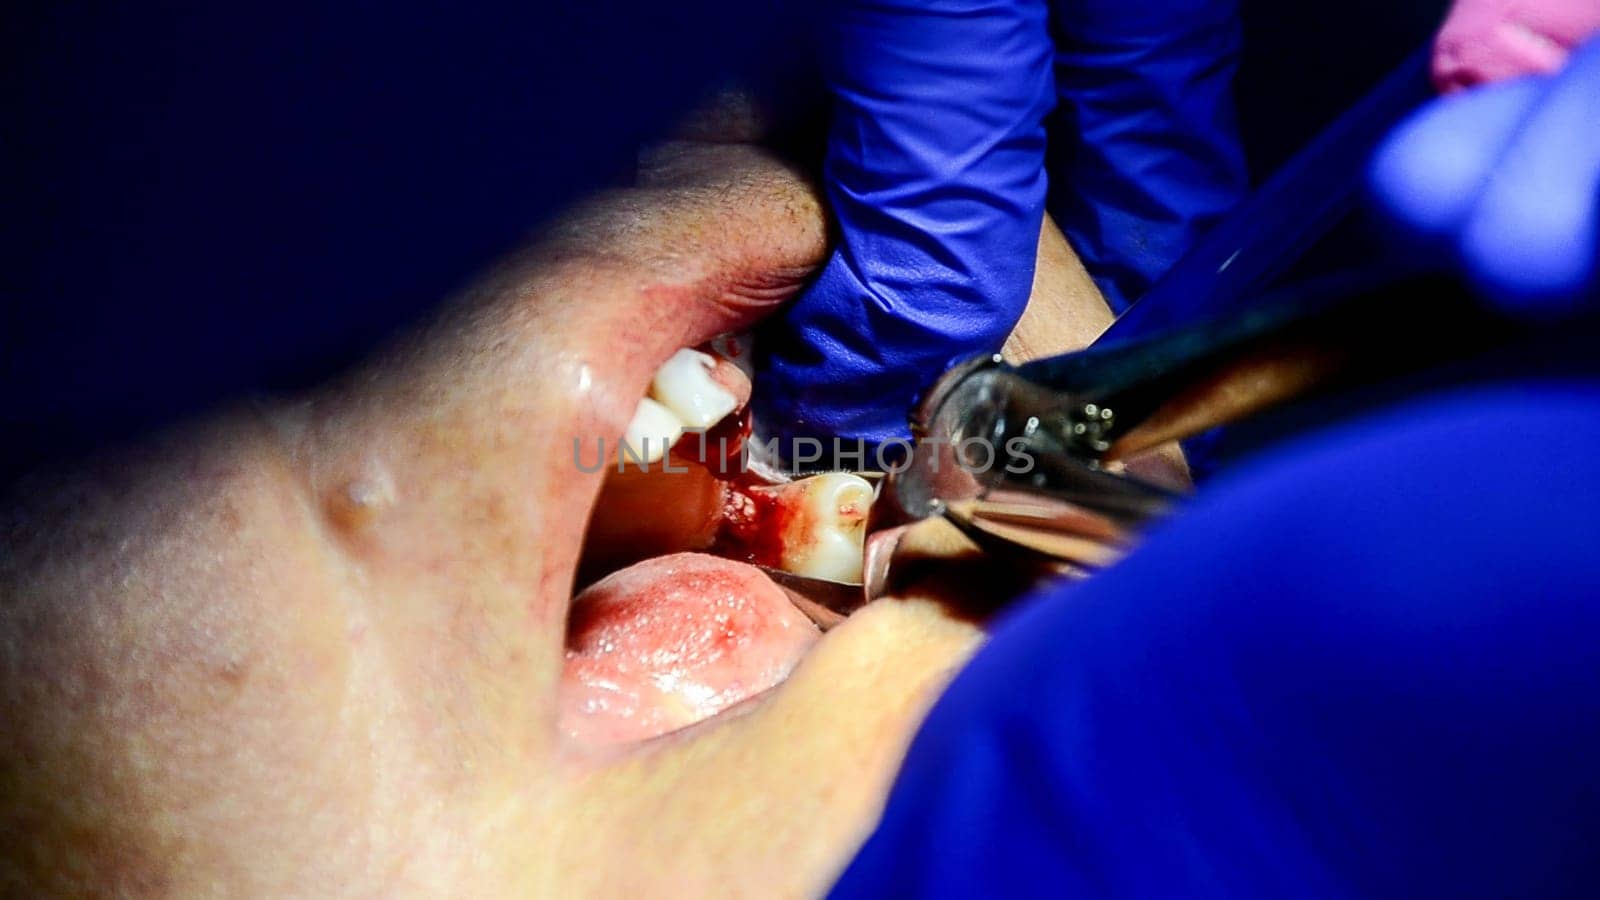 A close-up view of a dental operation, with tools in use by Peruphotoart